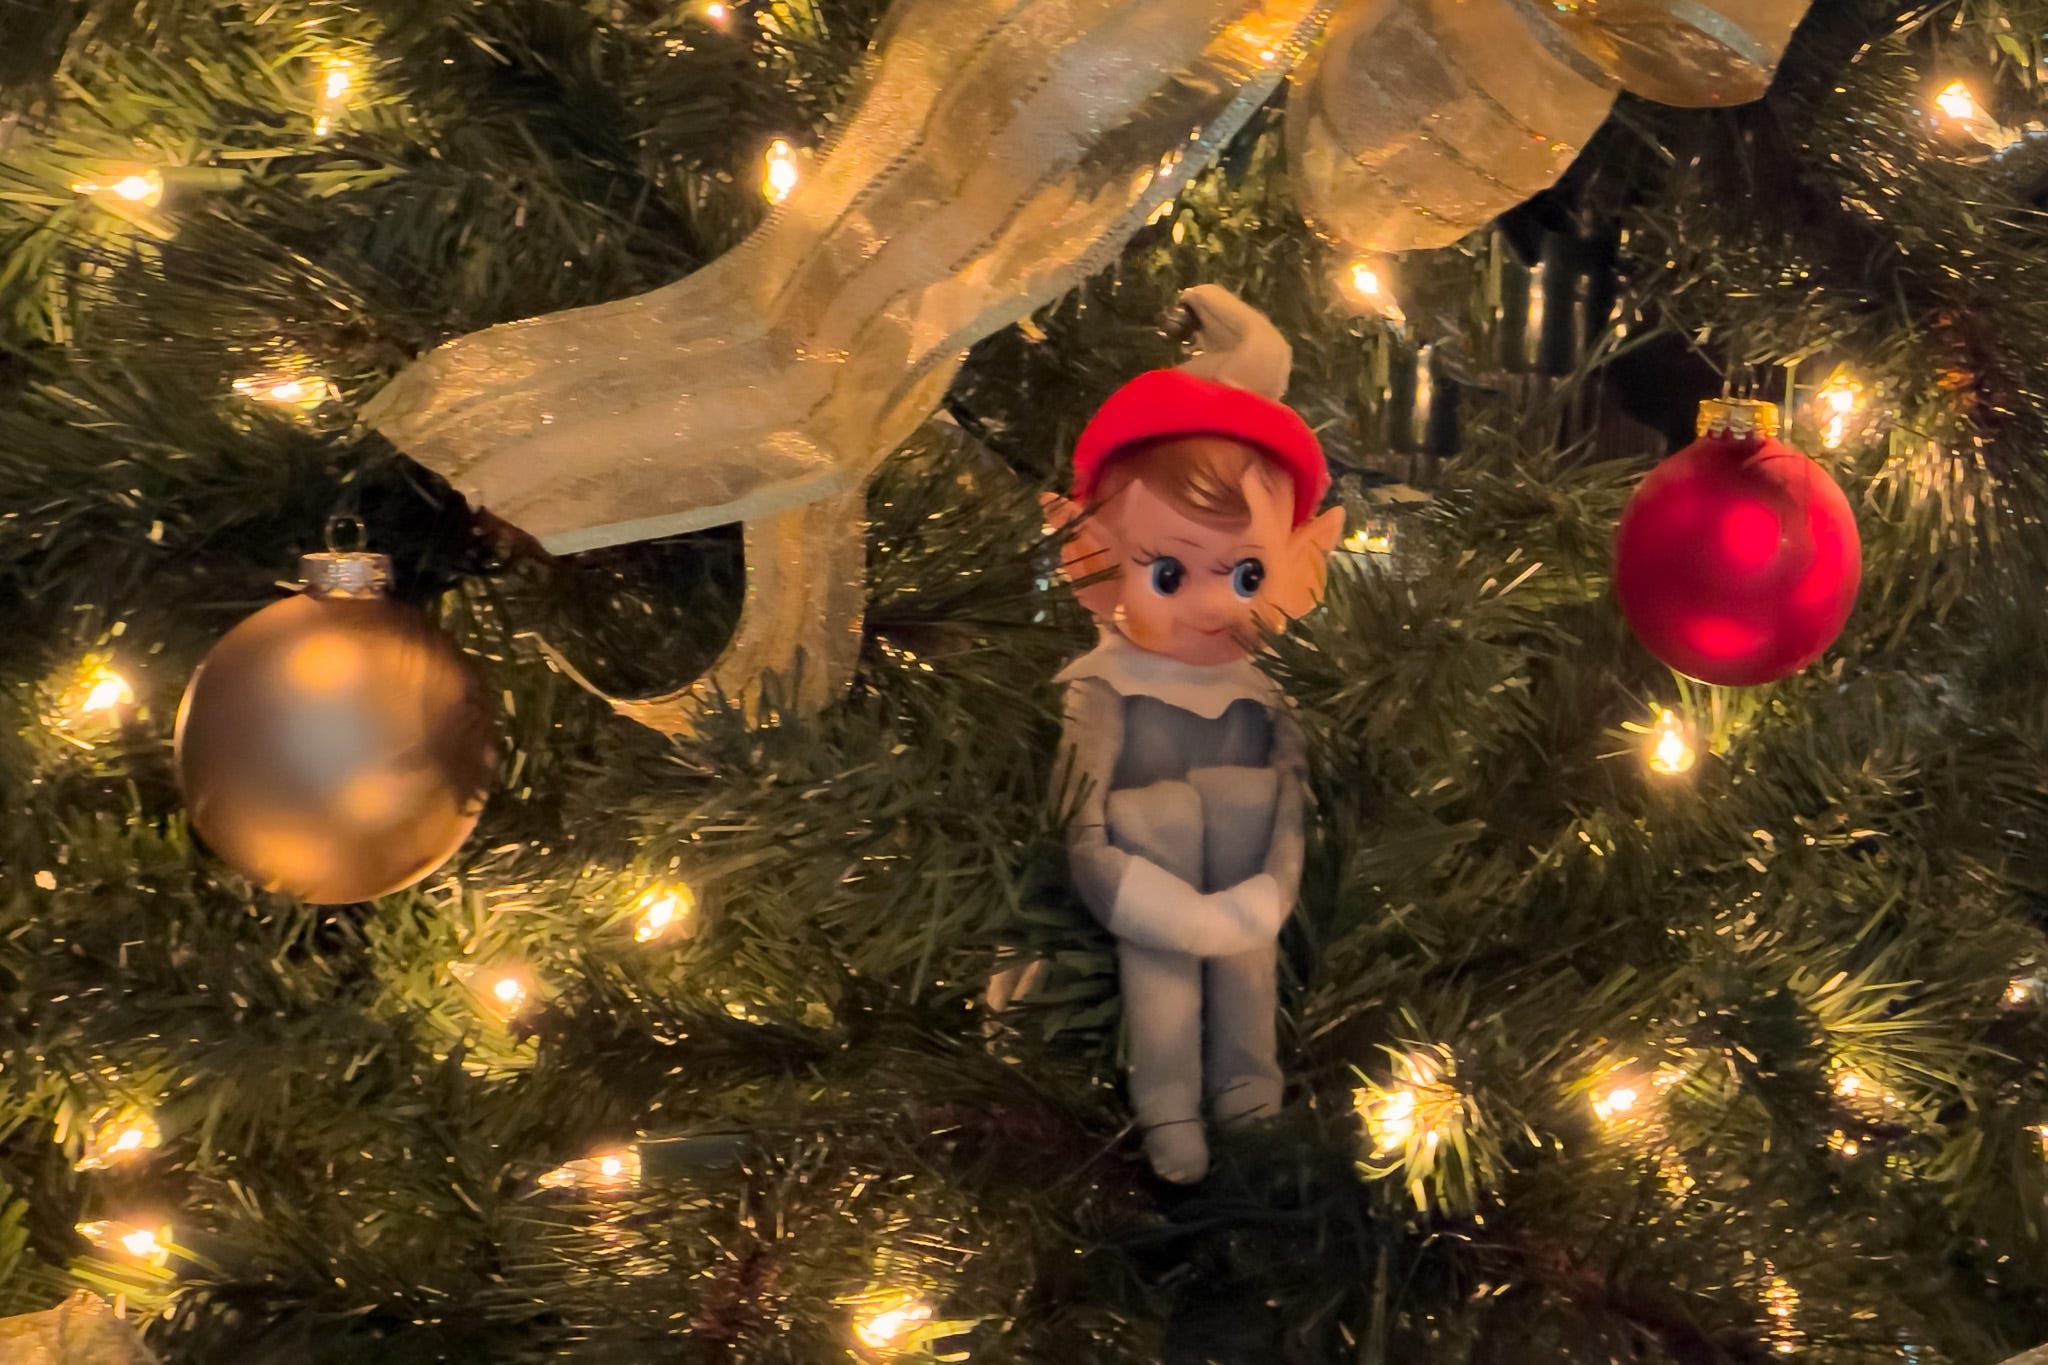 A faded green elf with a red hat sits perched on the limbs of a Christmas tree with sparkling white lights, a gold ball ornament on the left and a smaller red on on the right